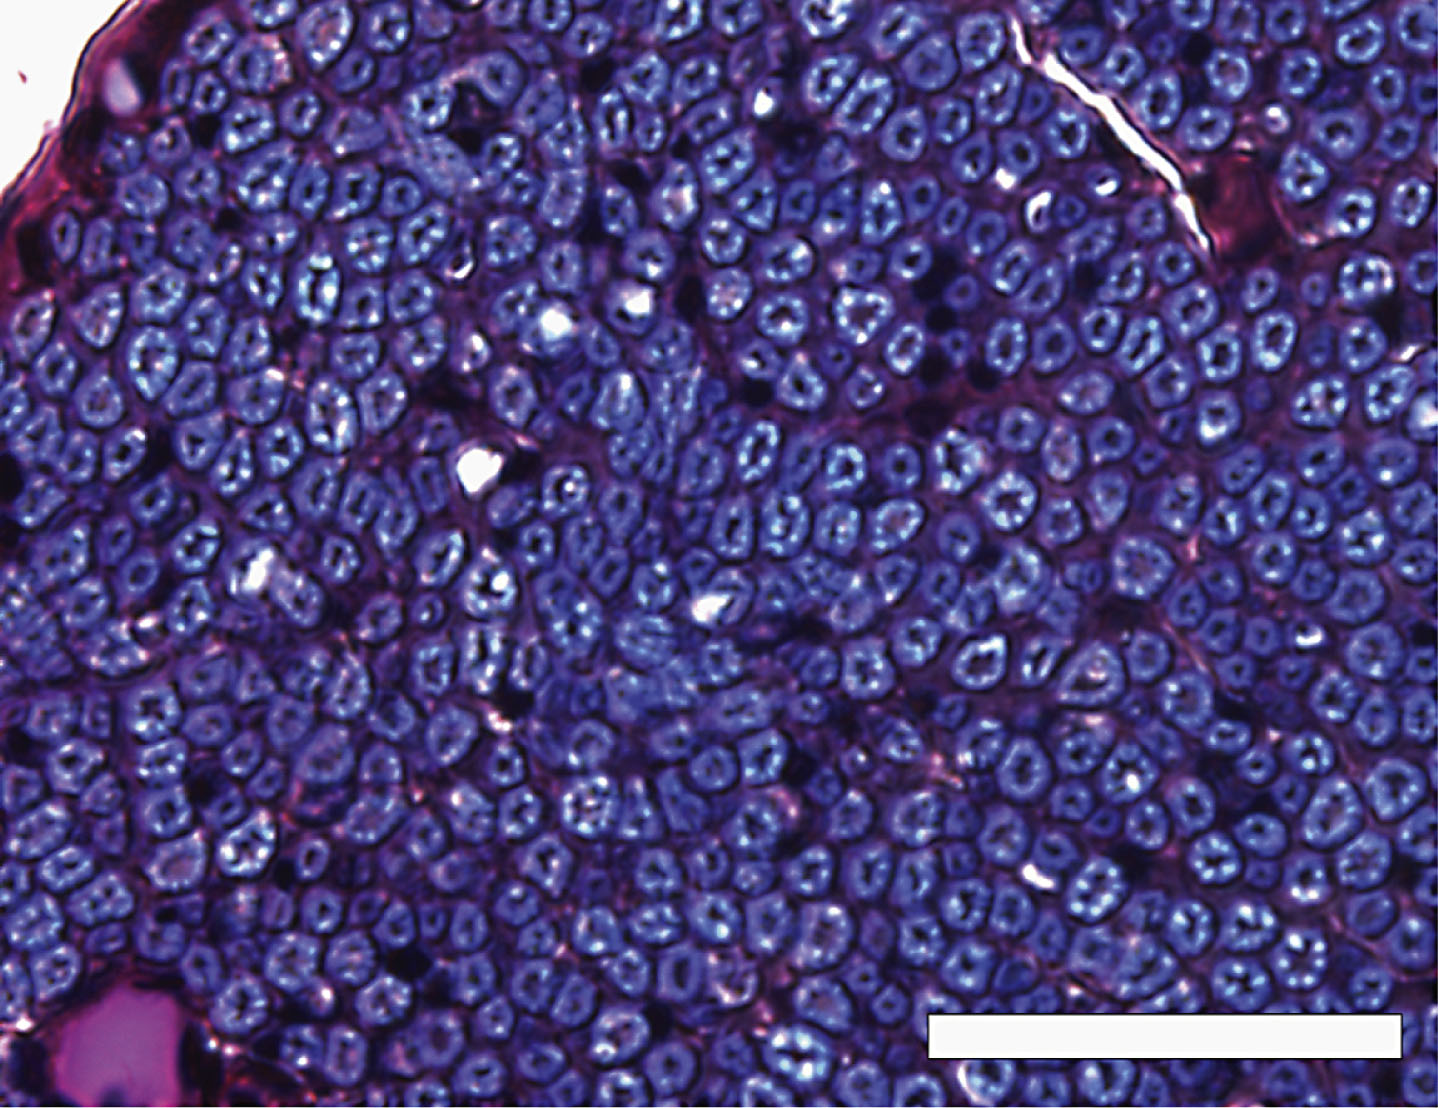 A high-power view of the inferior alveolar nerve from a 68-year-old man, modified luxol fast blue-periodic acid Schiff-hematoxylin triple stain. Axons were stained dark purple or black, and surrounded by a myelin sheath stained indigo blue. Scale bar = 50 μm.